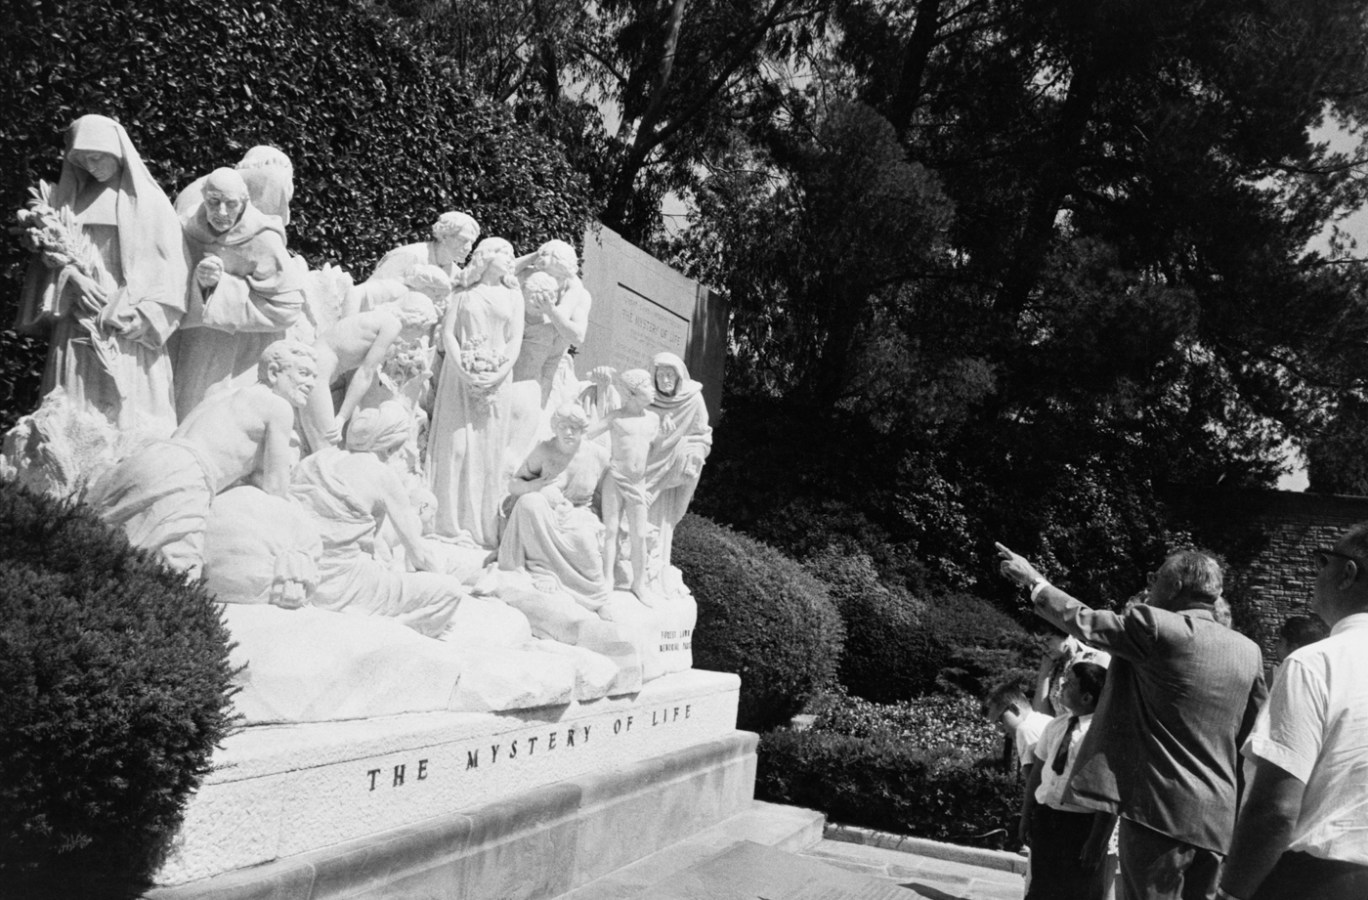 Black-and-white photograph of a man pointing out a large group memorial sculpture titled THE MYSTERY OF LIFE to a small group